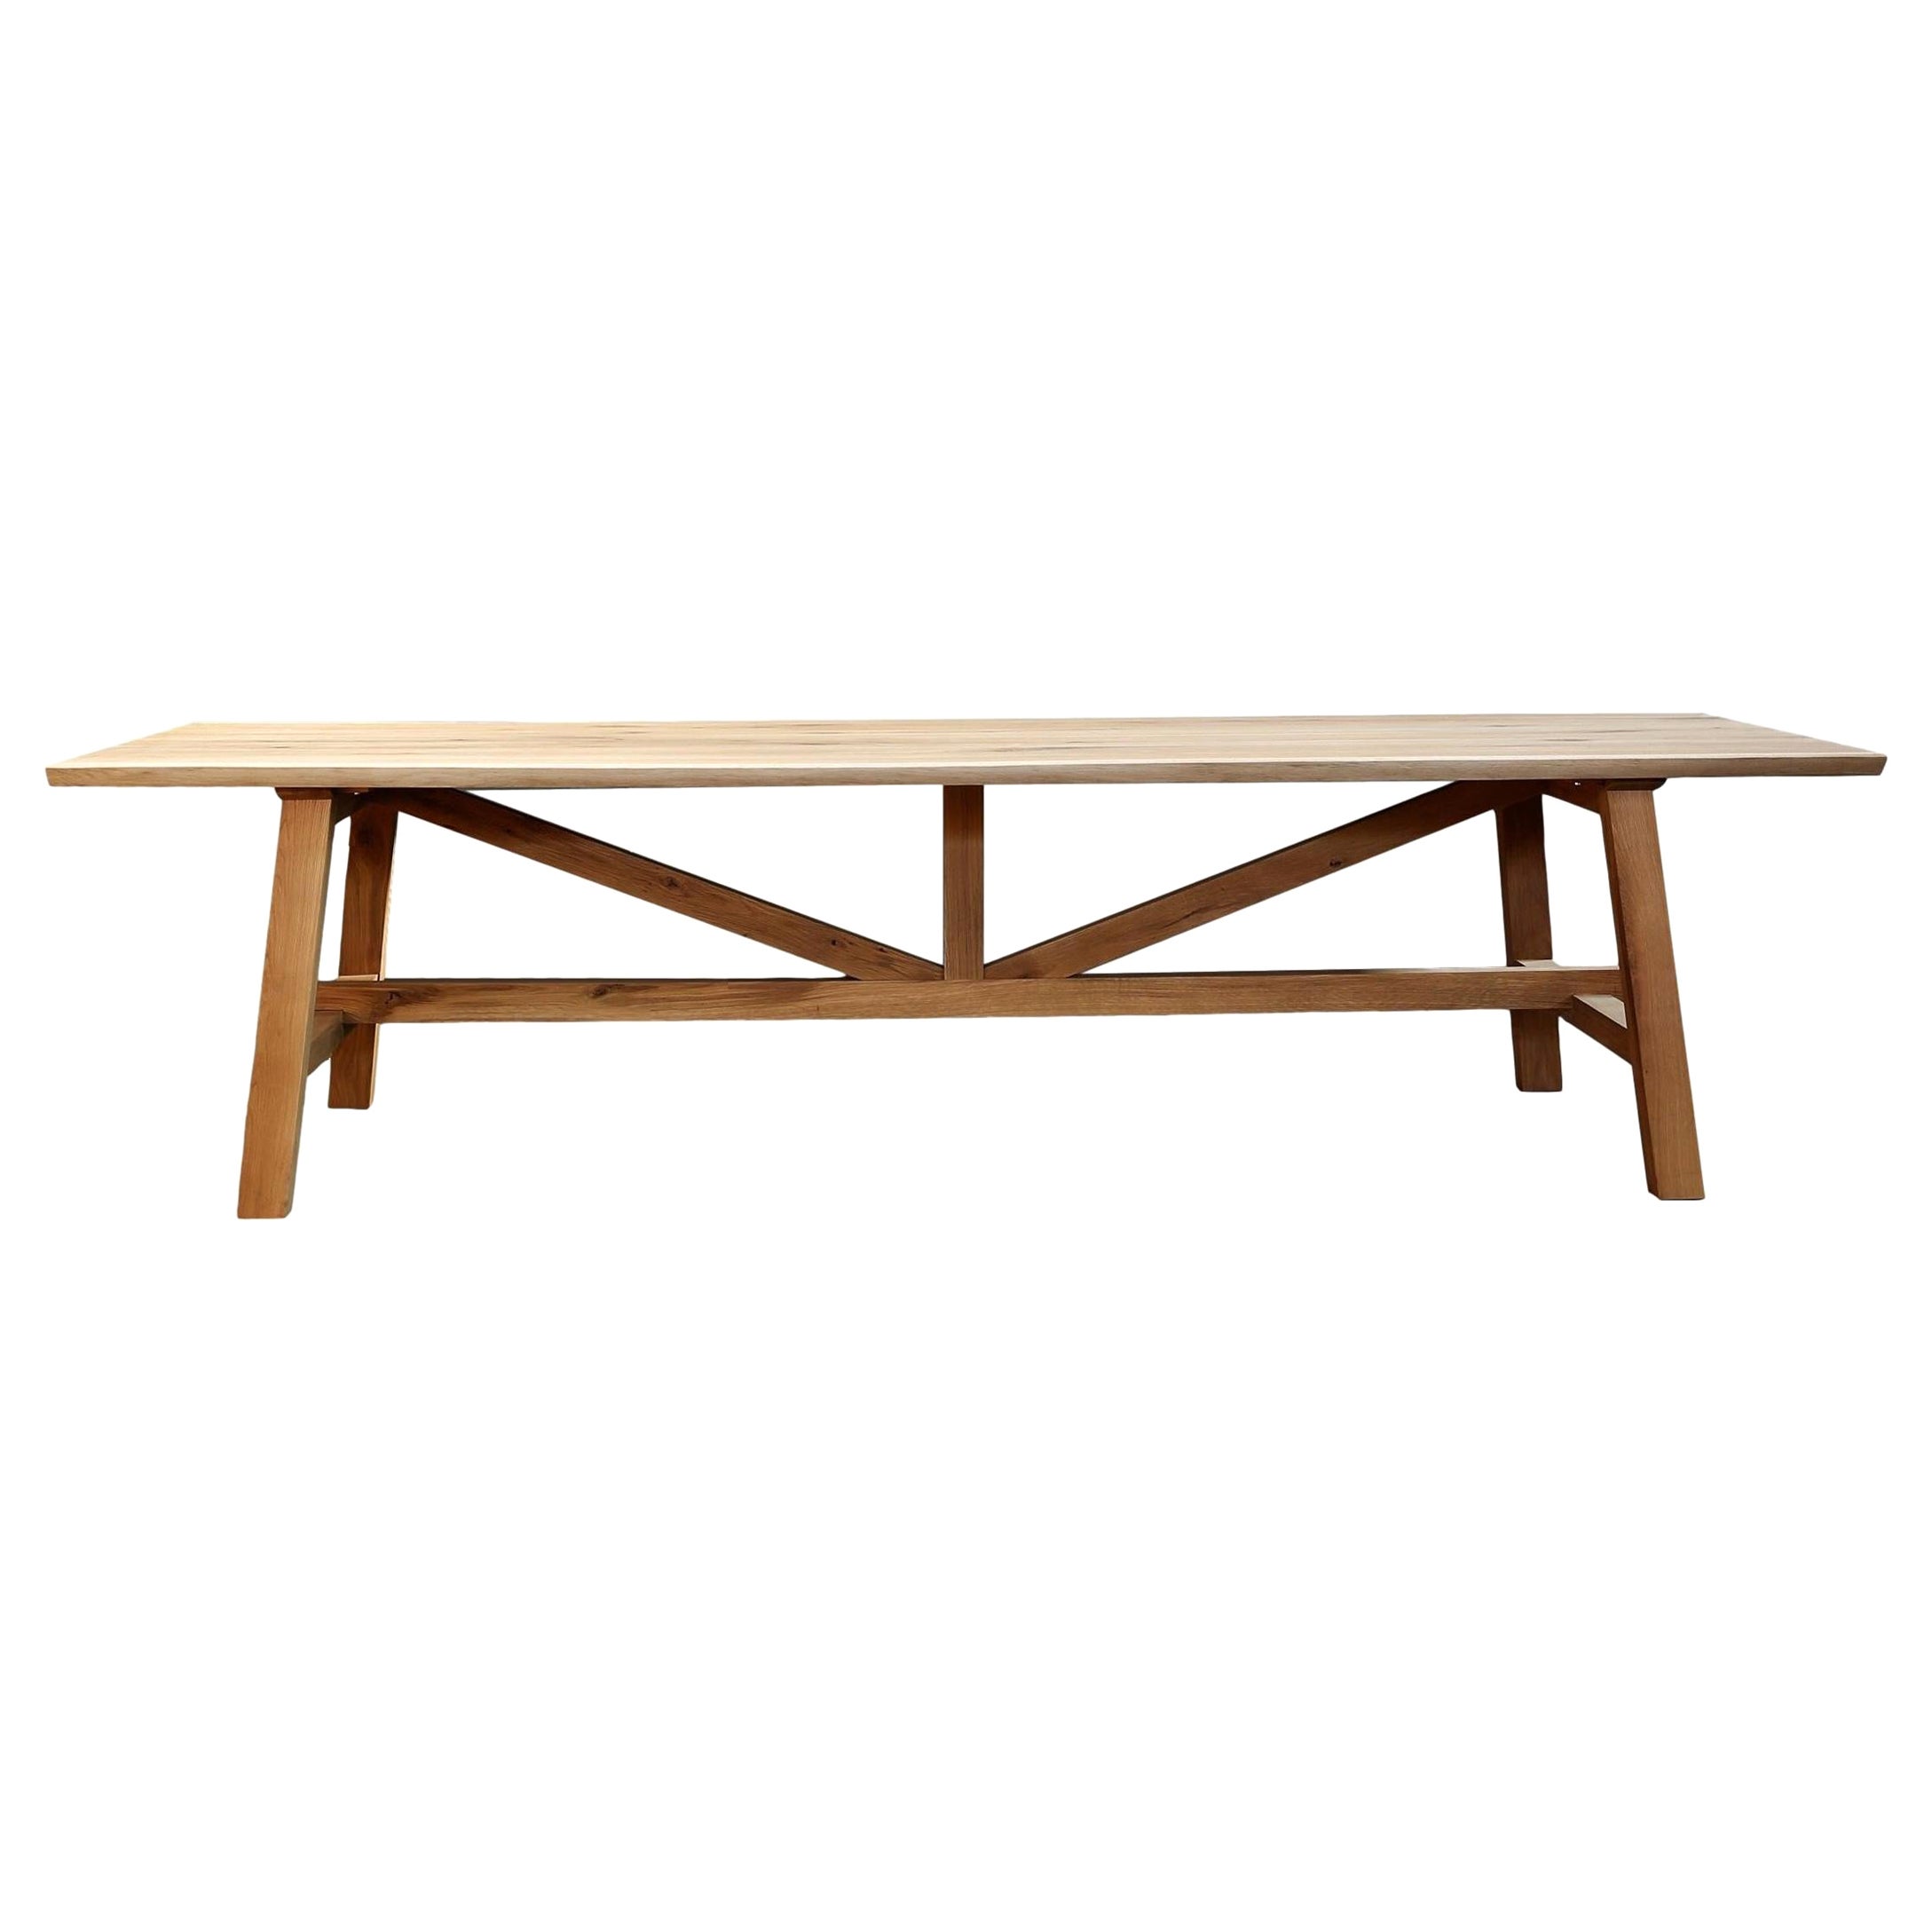 14' - 9" Dining Table in Natural Oak For Sale